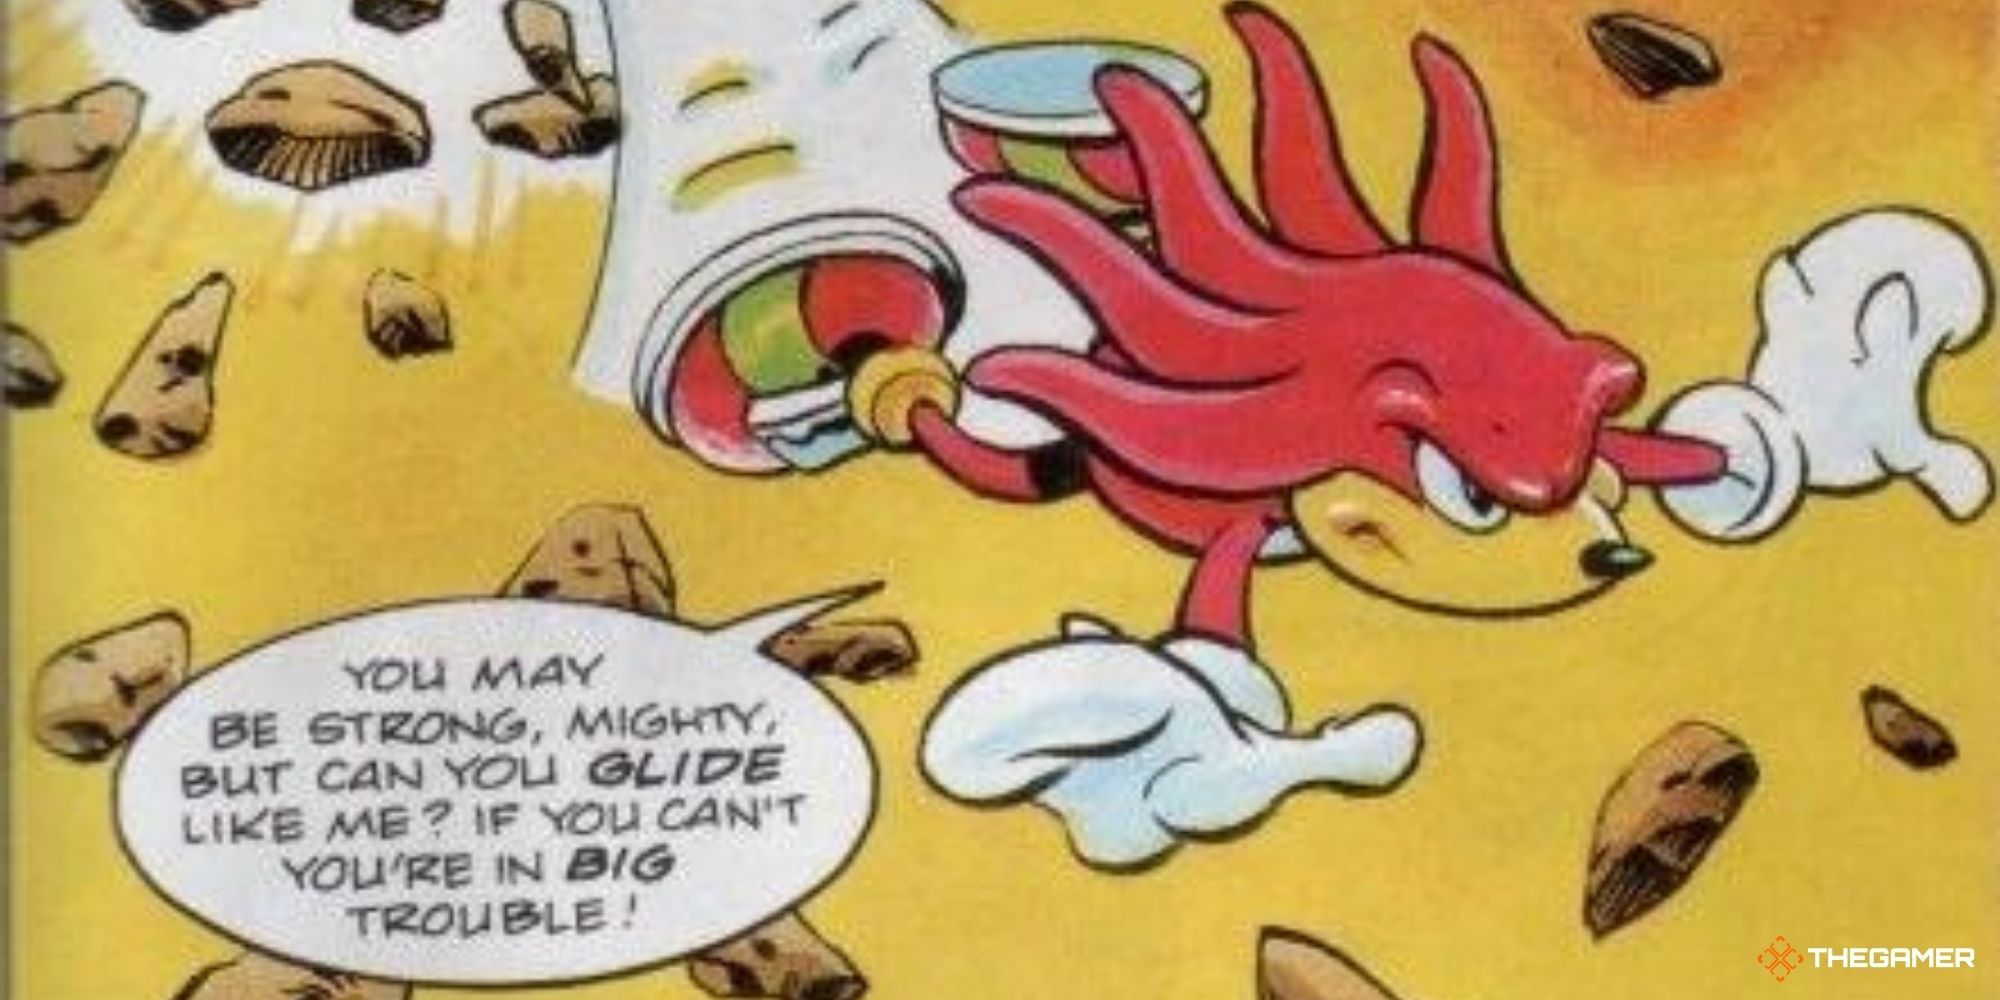 Sonic the Hedgehog - Knuckles the Echidna gliding